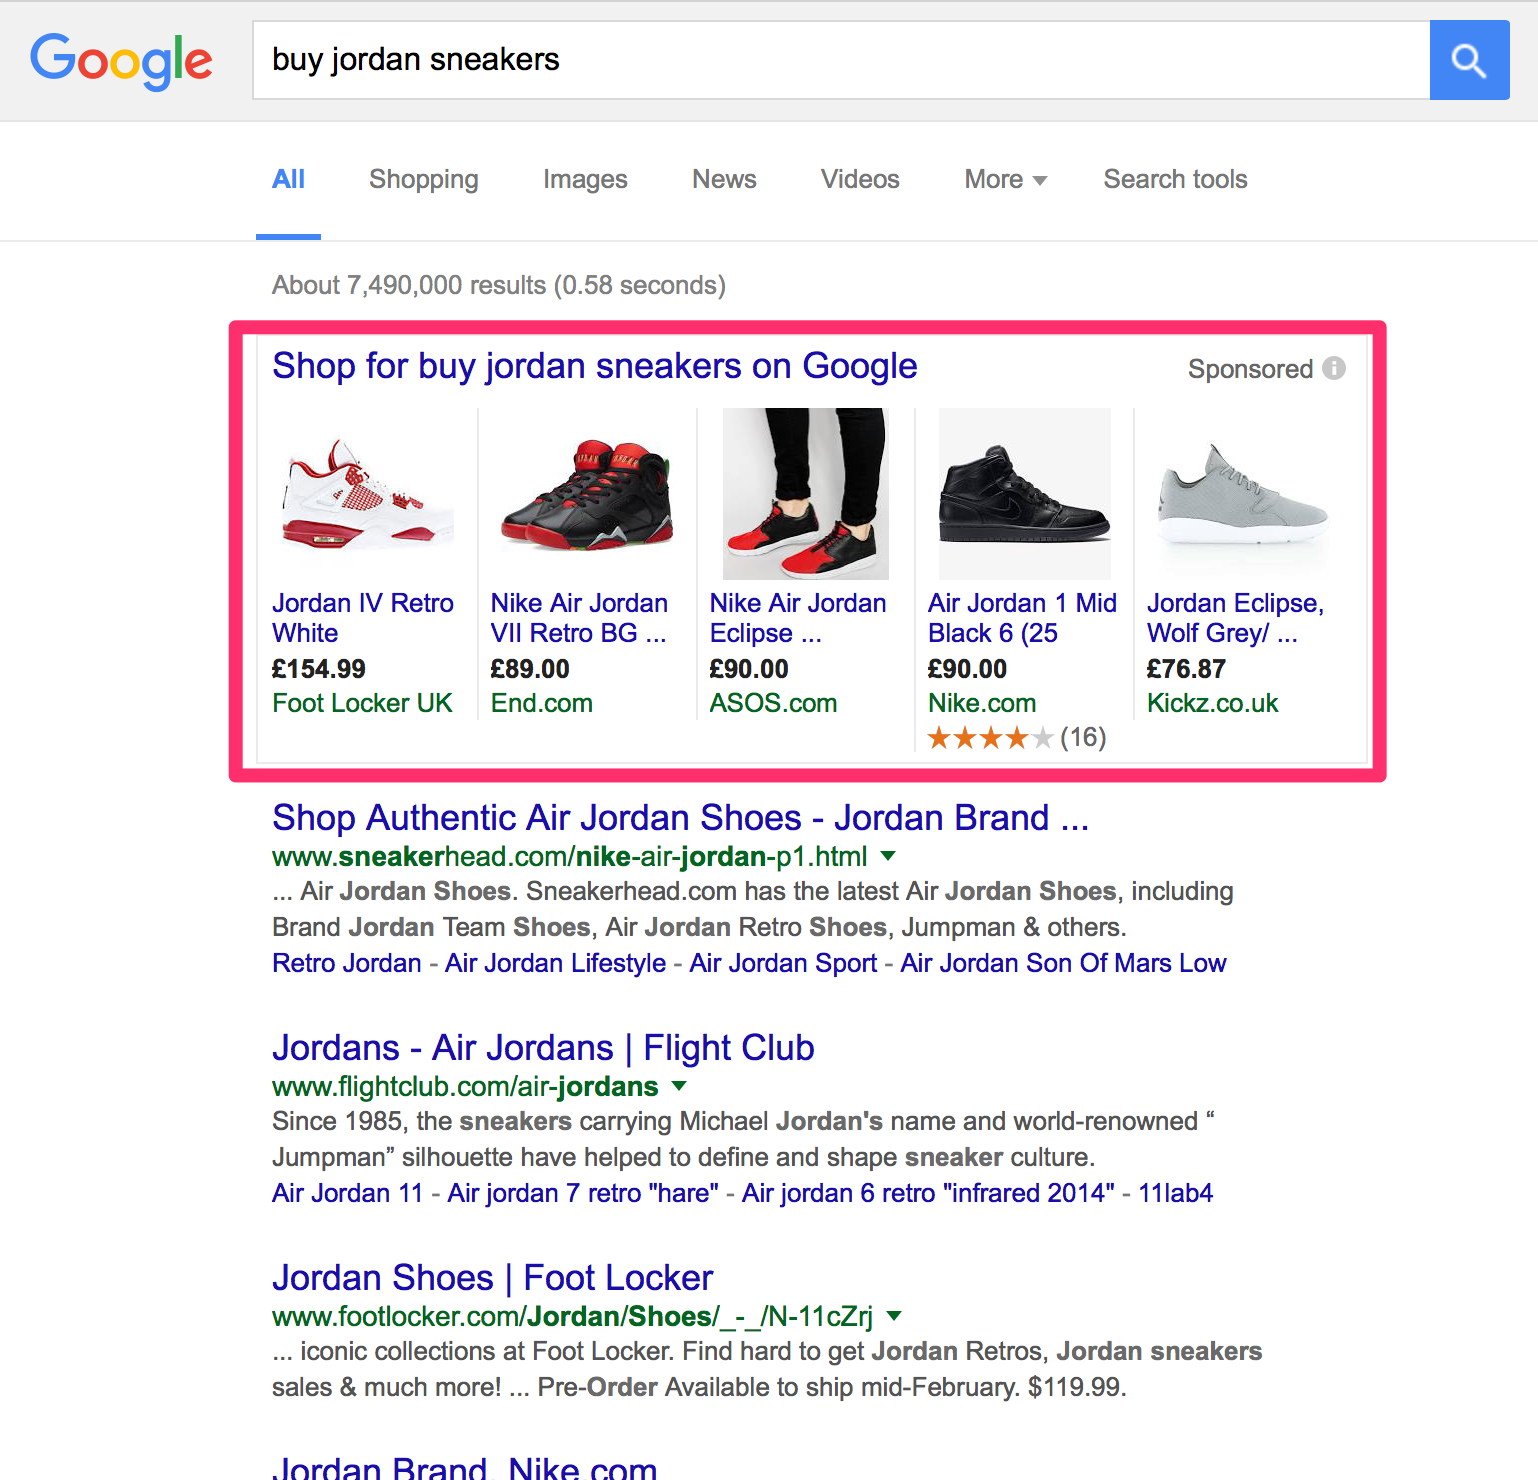 shopping ads : Paid search